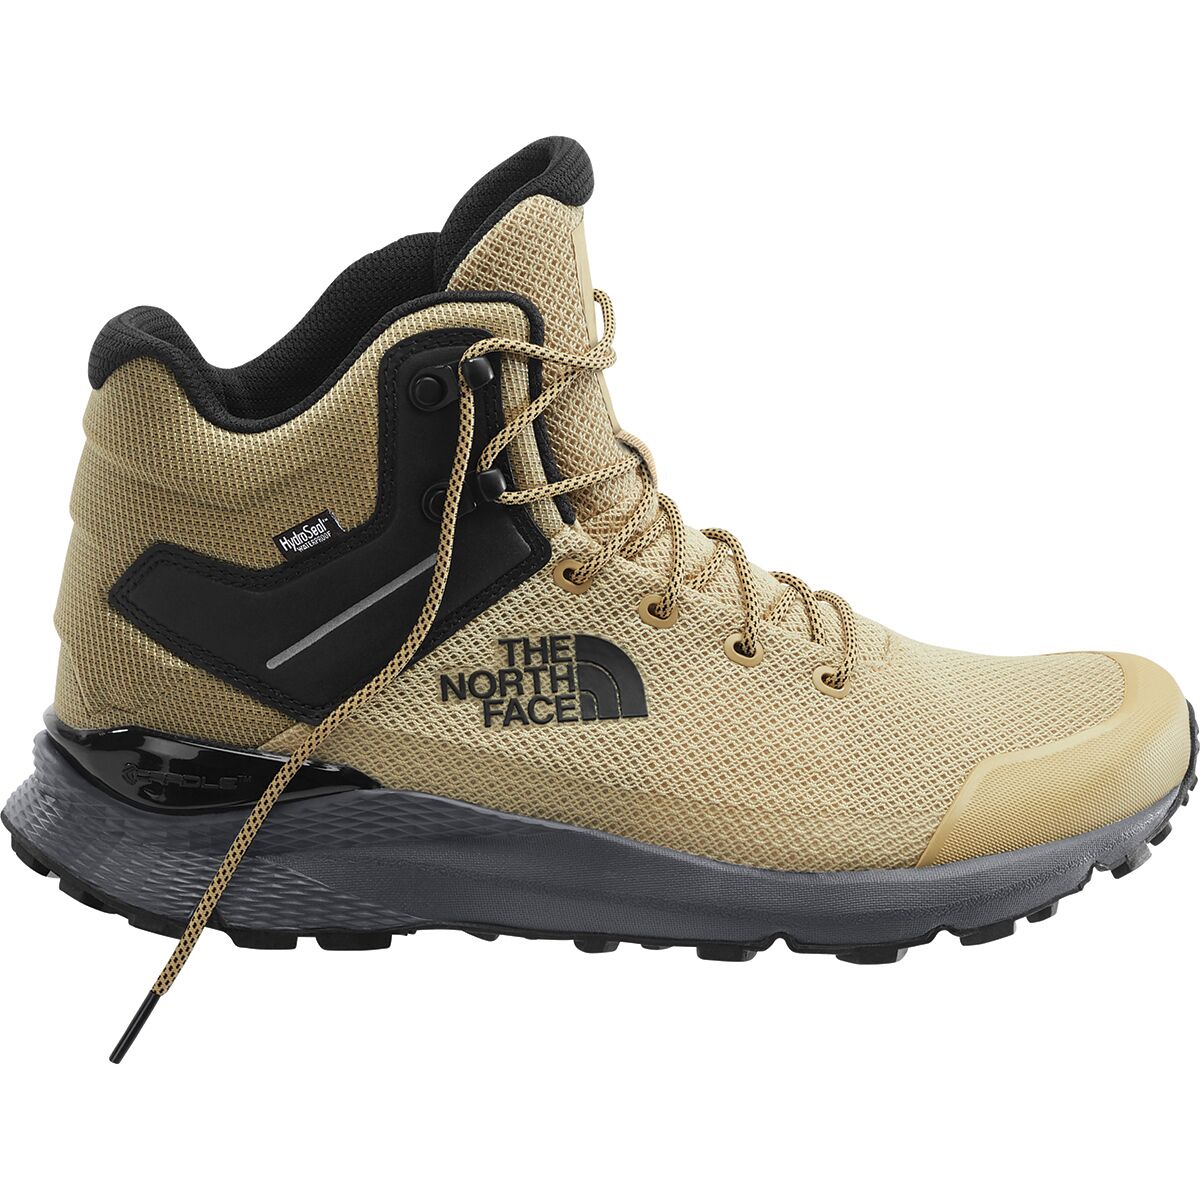 the north face vals mid waterproof hiking shoe